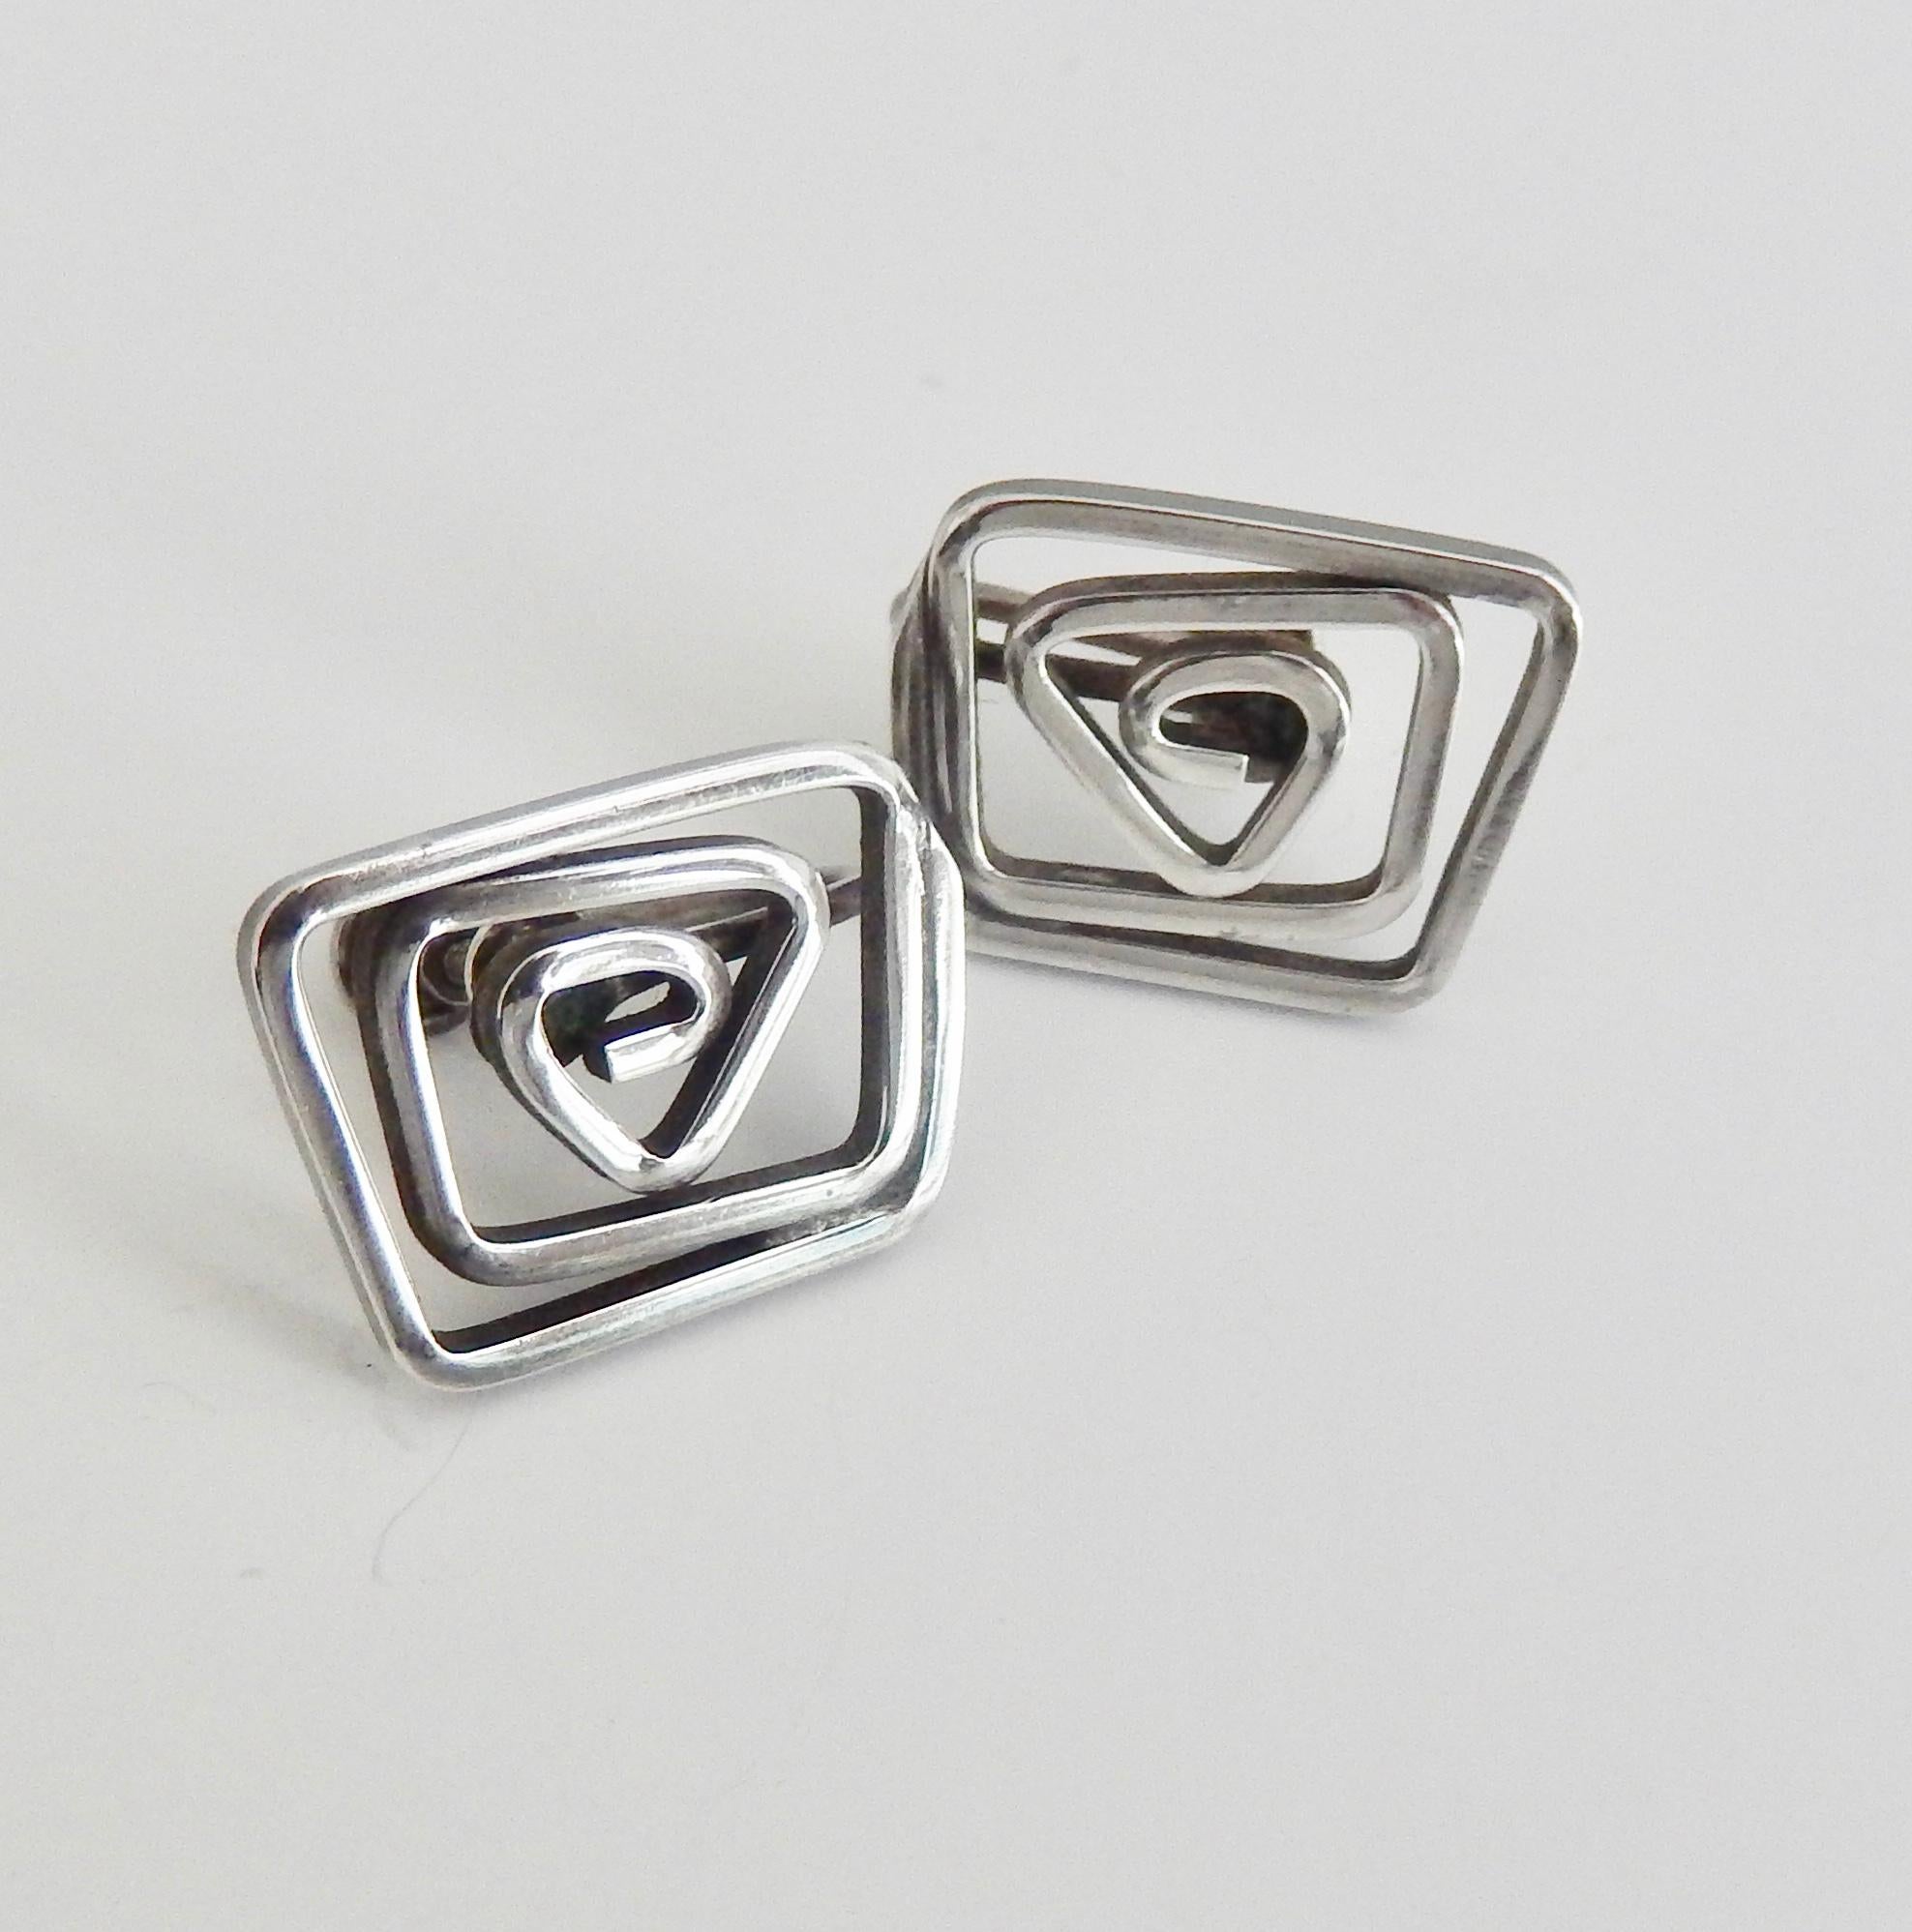 A pair of vintage, screw back, sterling silver earrings with a spiral design by the modernist jeweler Ed Levin.  Known for his skilled workmanship and creative designs, these earrings are a fine example of mid-century American Modernist jewelry.  